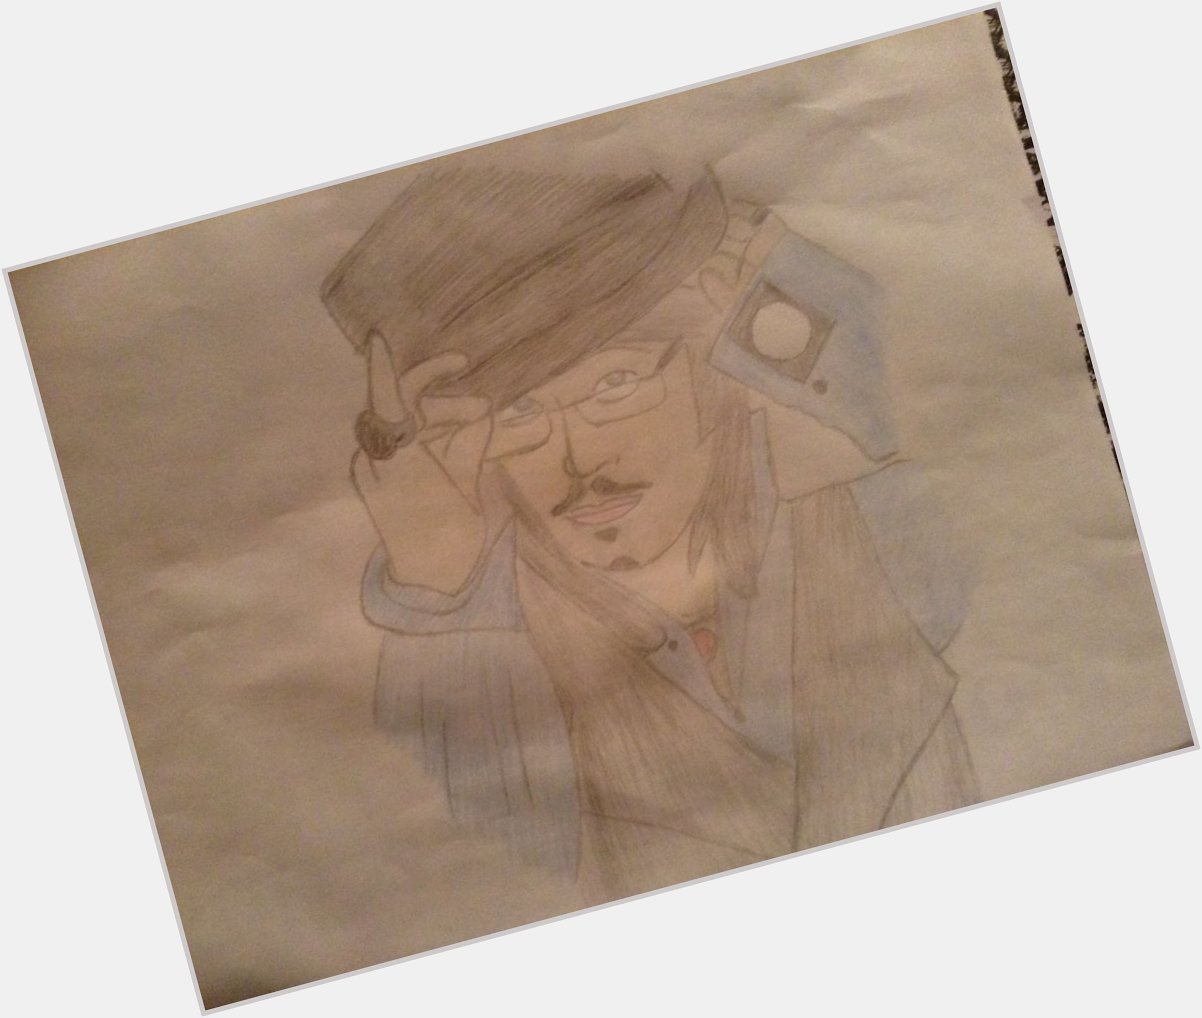 Well here it is my drawing. It\s not my best drawing but seeming it\s his birthday Happy birthday Adam Ant! 